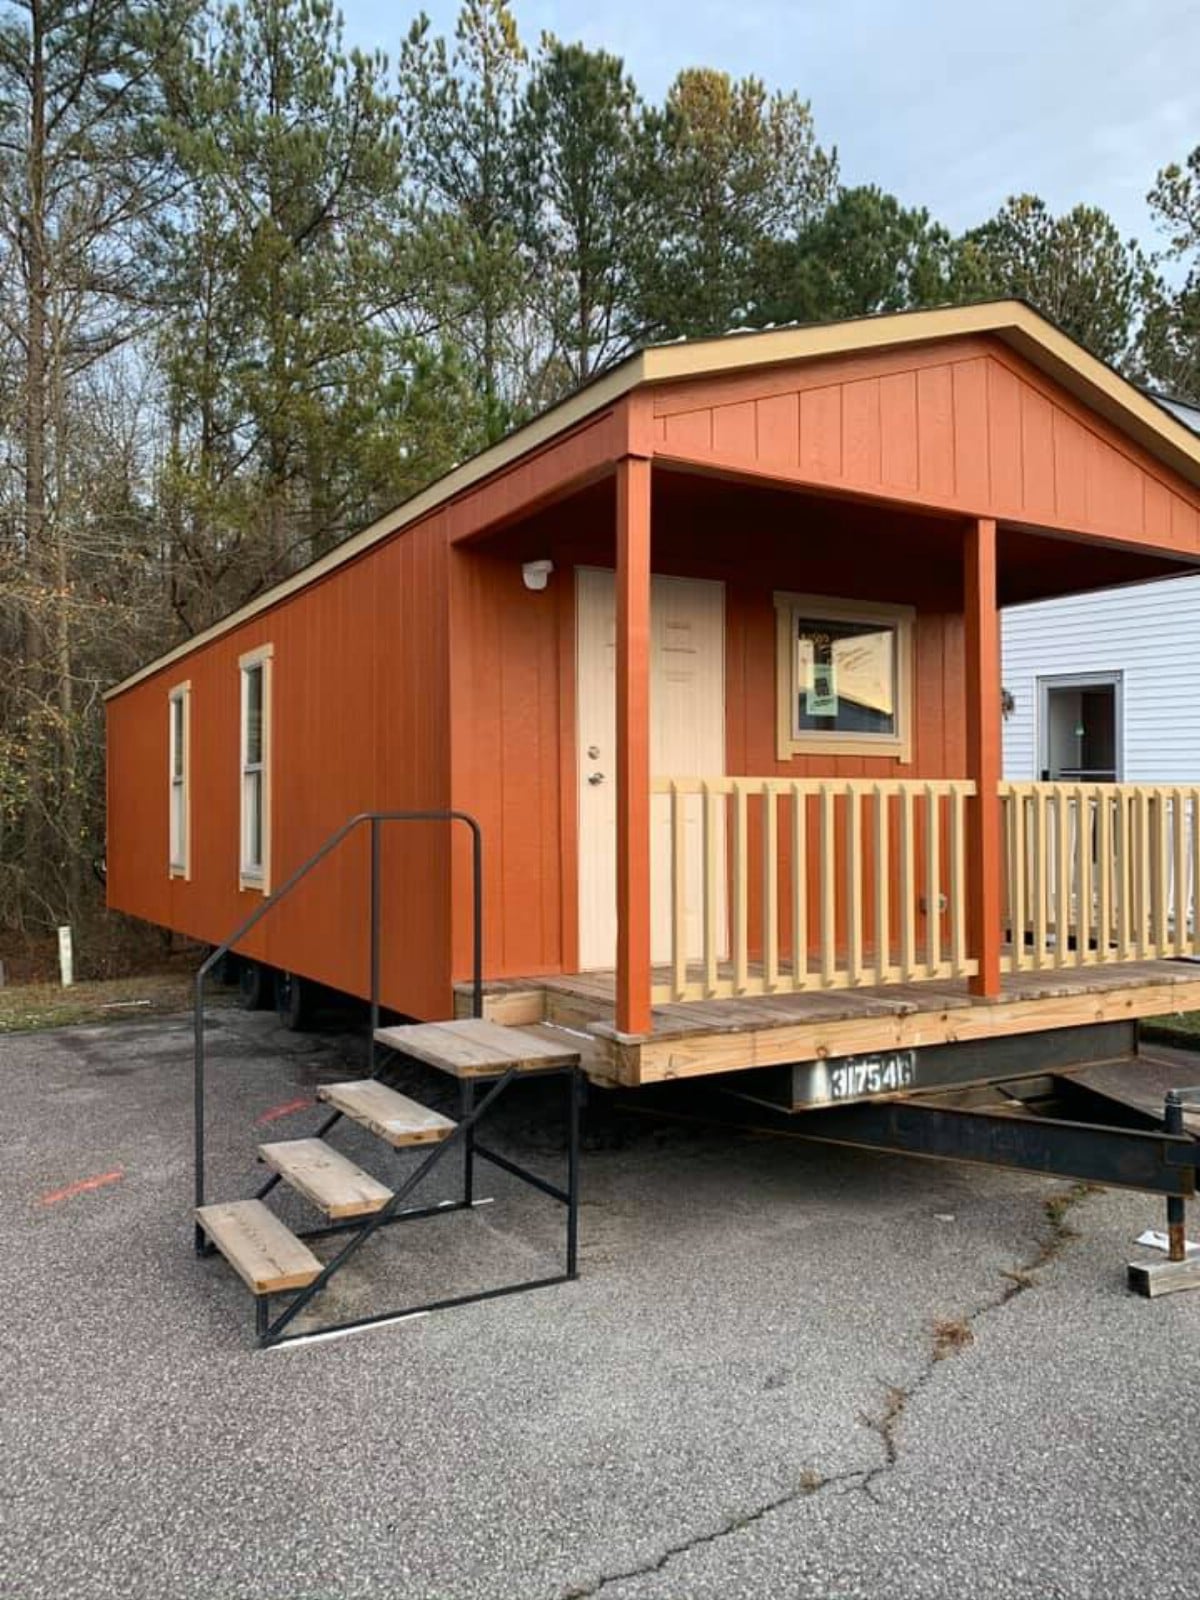 This Tiny House in Georgia is For Sale For Just 27 500 Tiny Houses